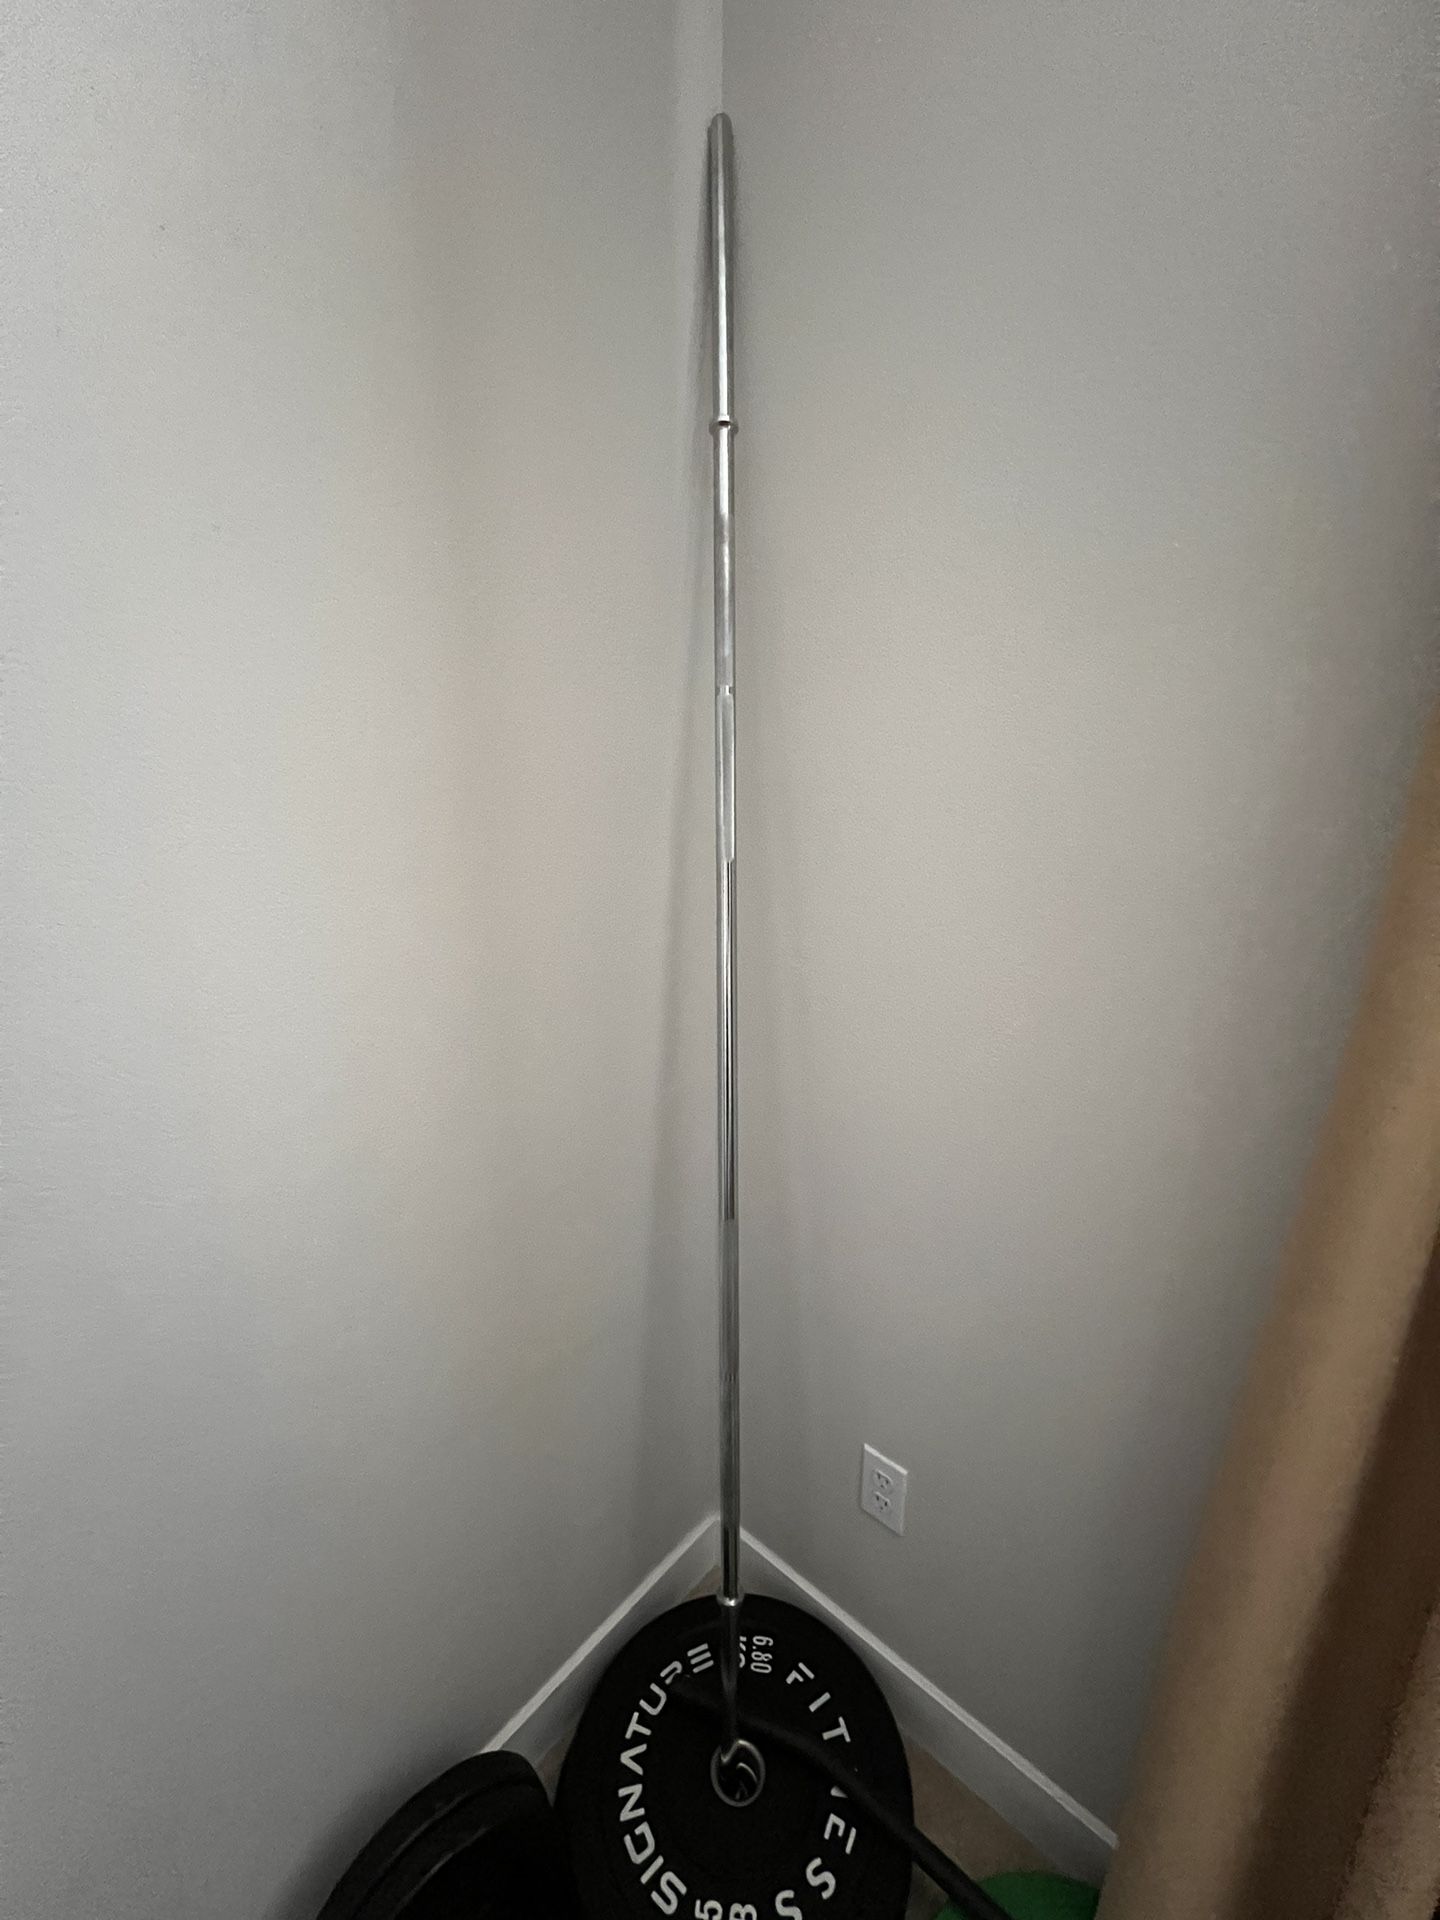 7ft 1 Inch Olympic Barbell $50